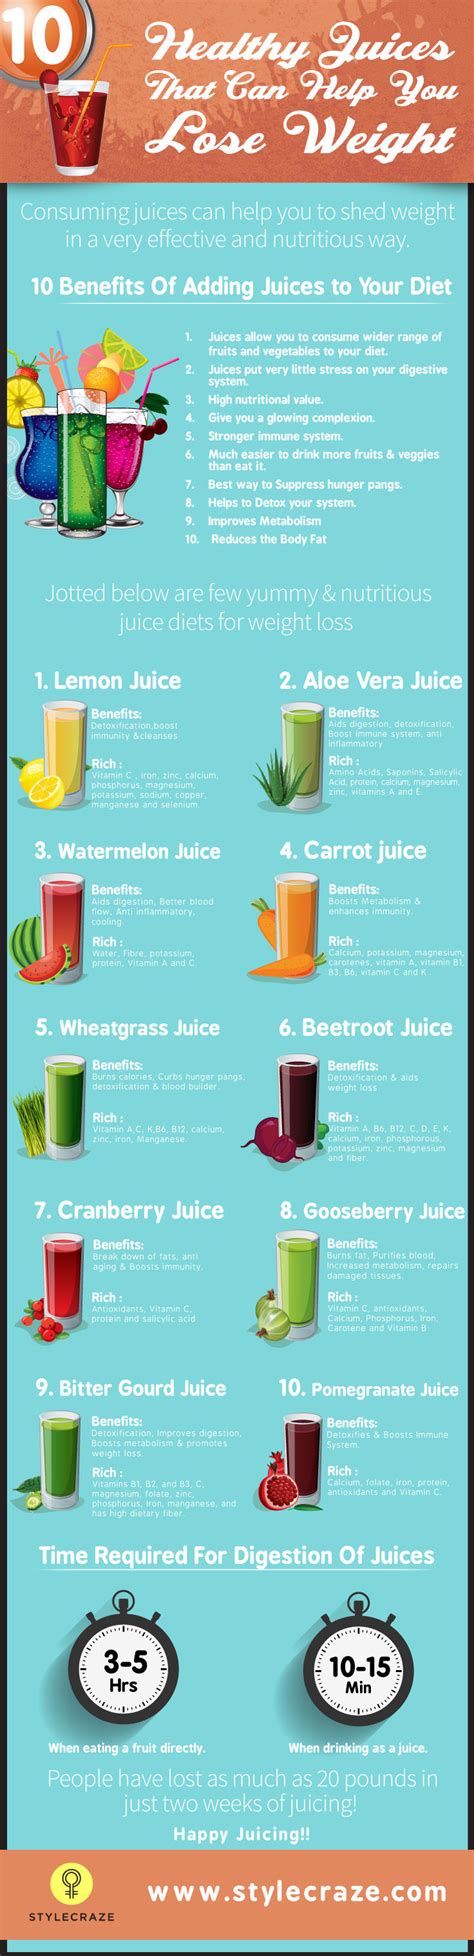 10 Healthy Juices That Can Help You To Lose Weight Pictures Photos